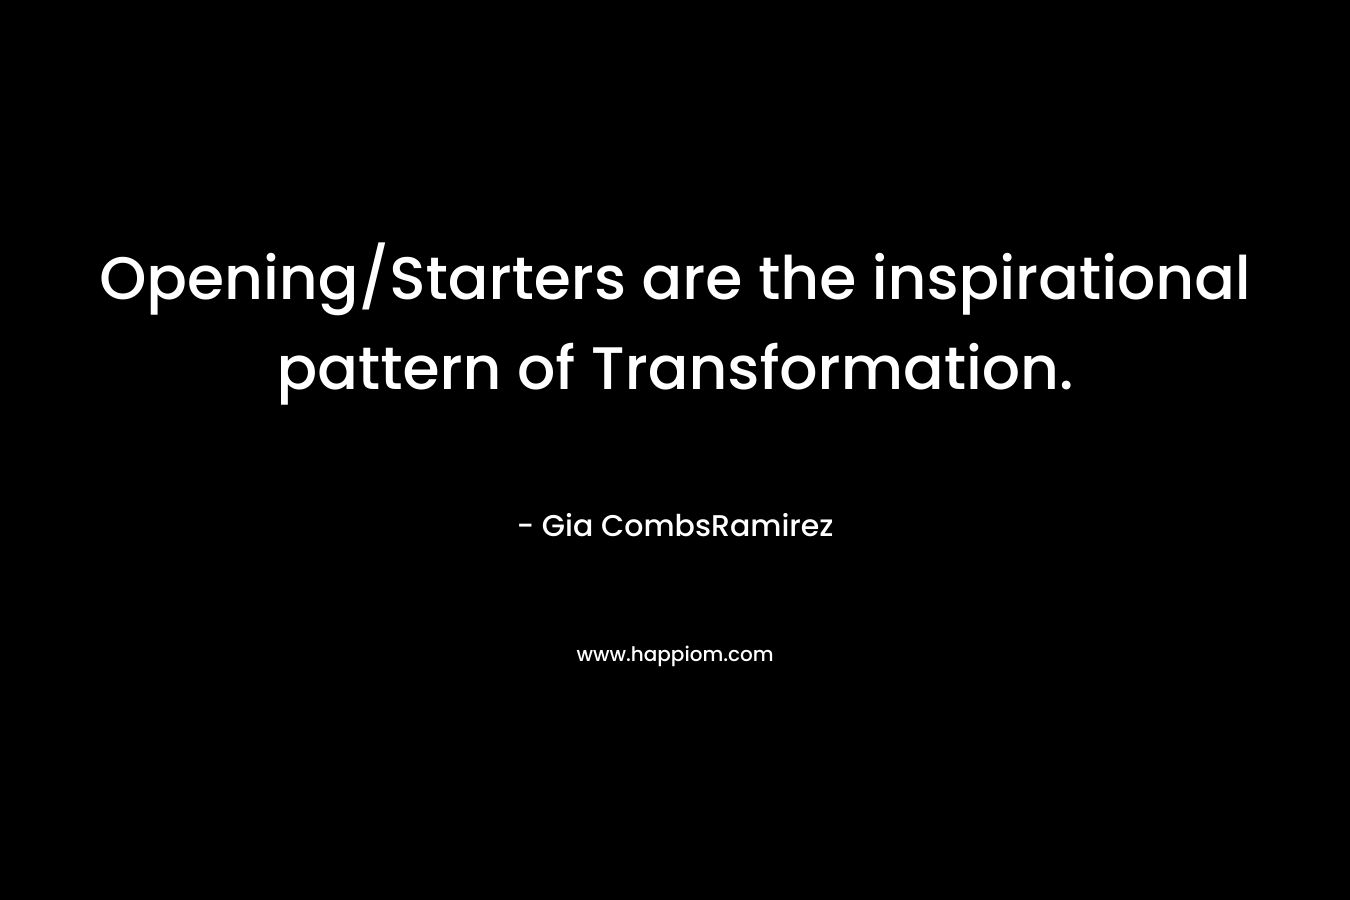 Opening/Starters are the inspirational pattern of Transformation.